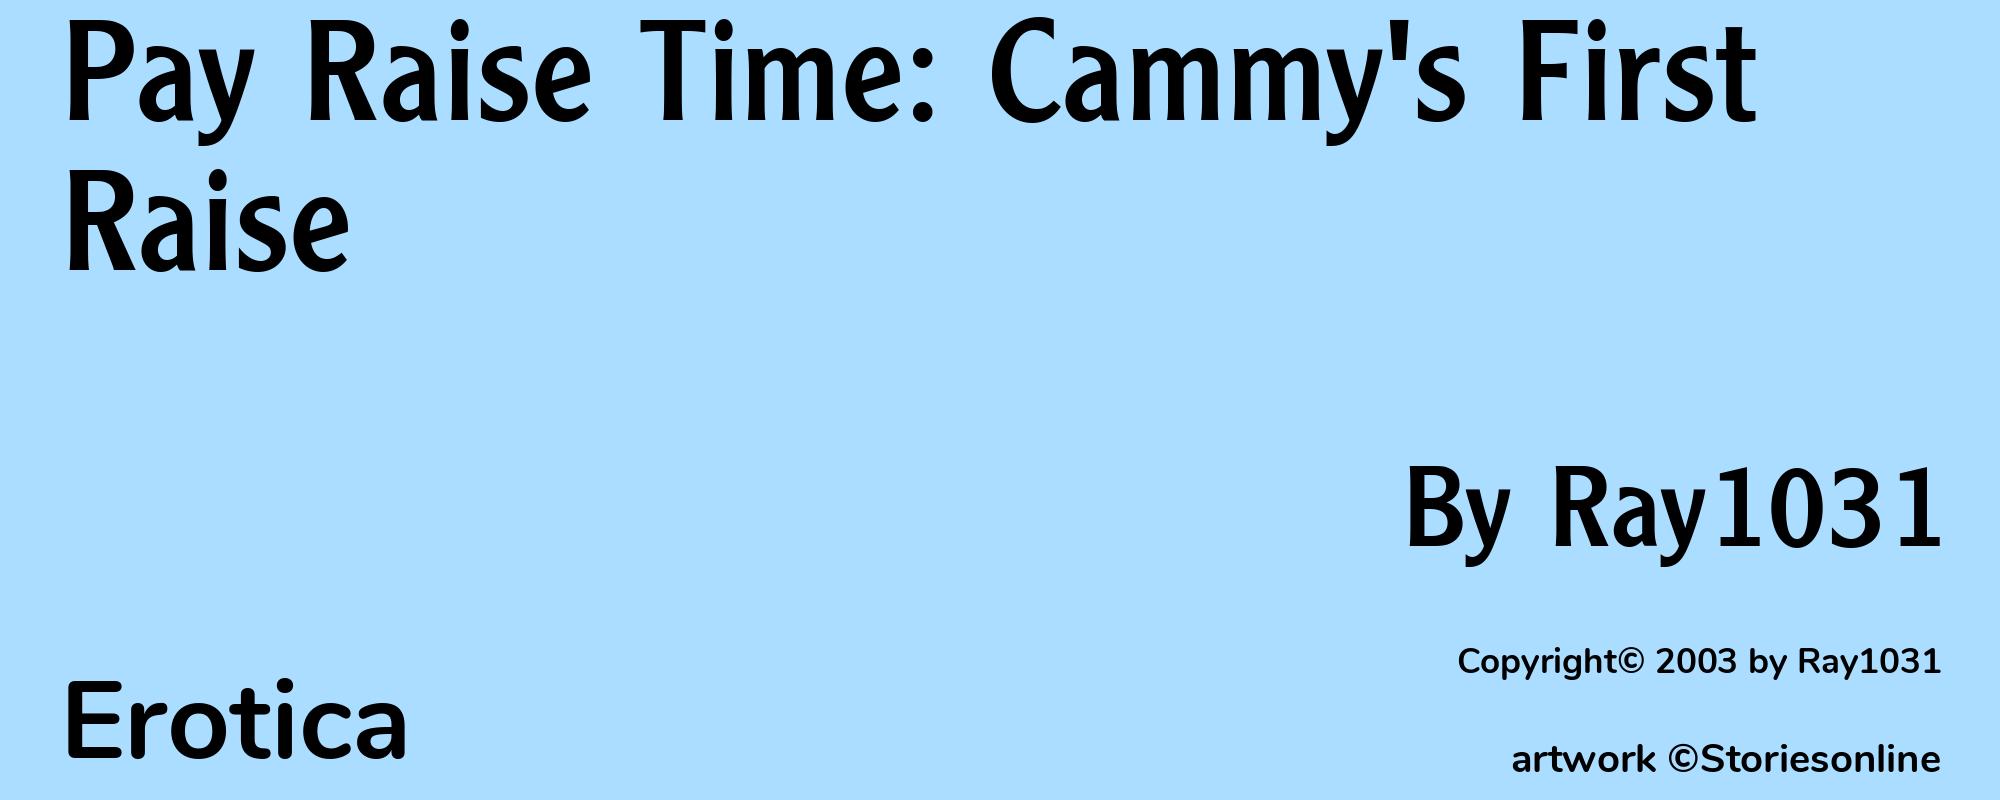 Pay Raise Time: Cammy's First Raise - Cover